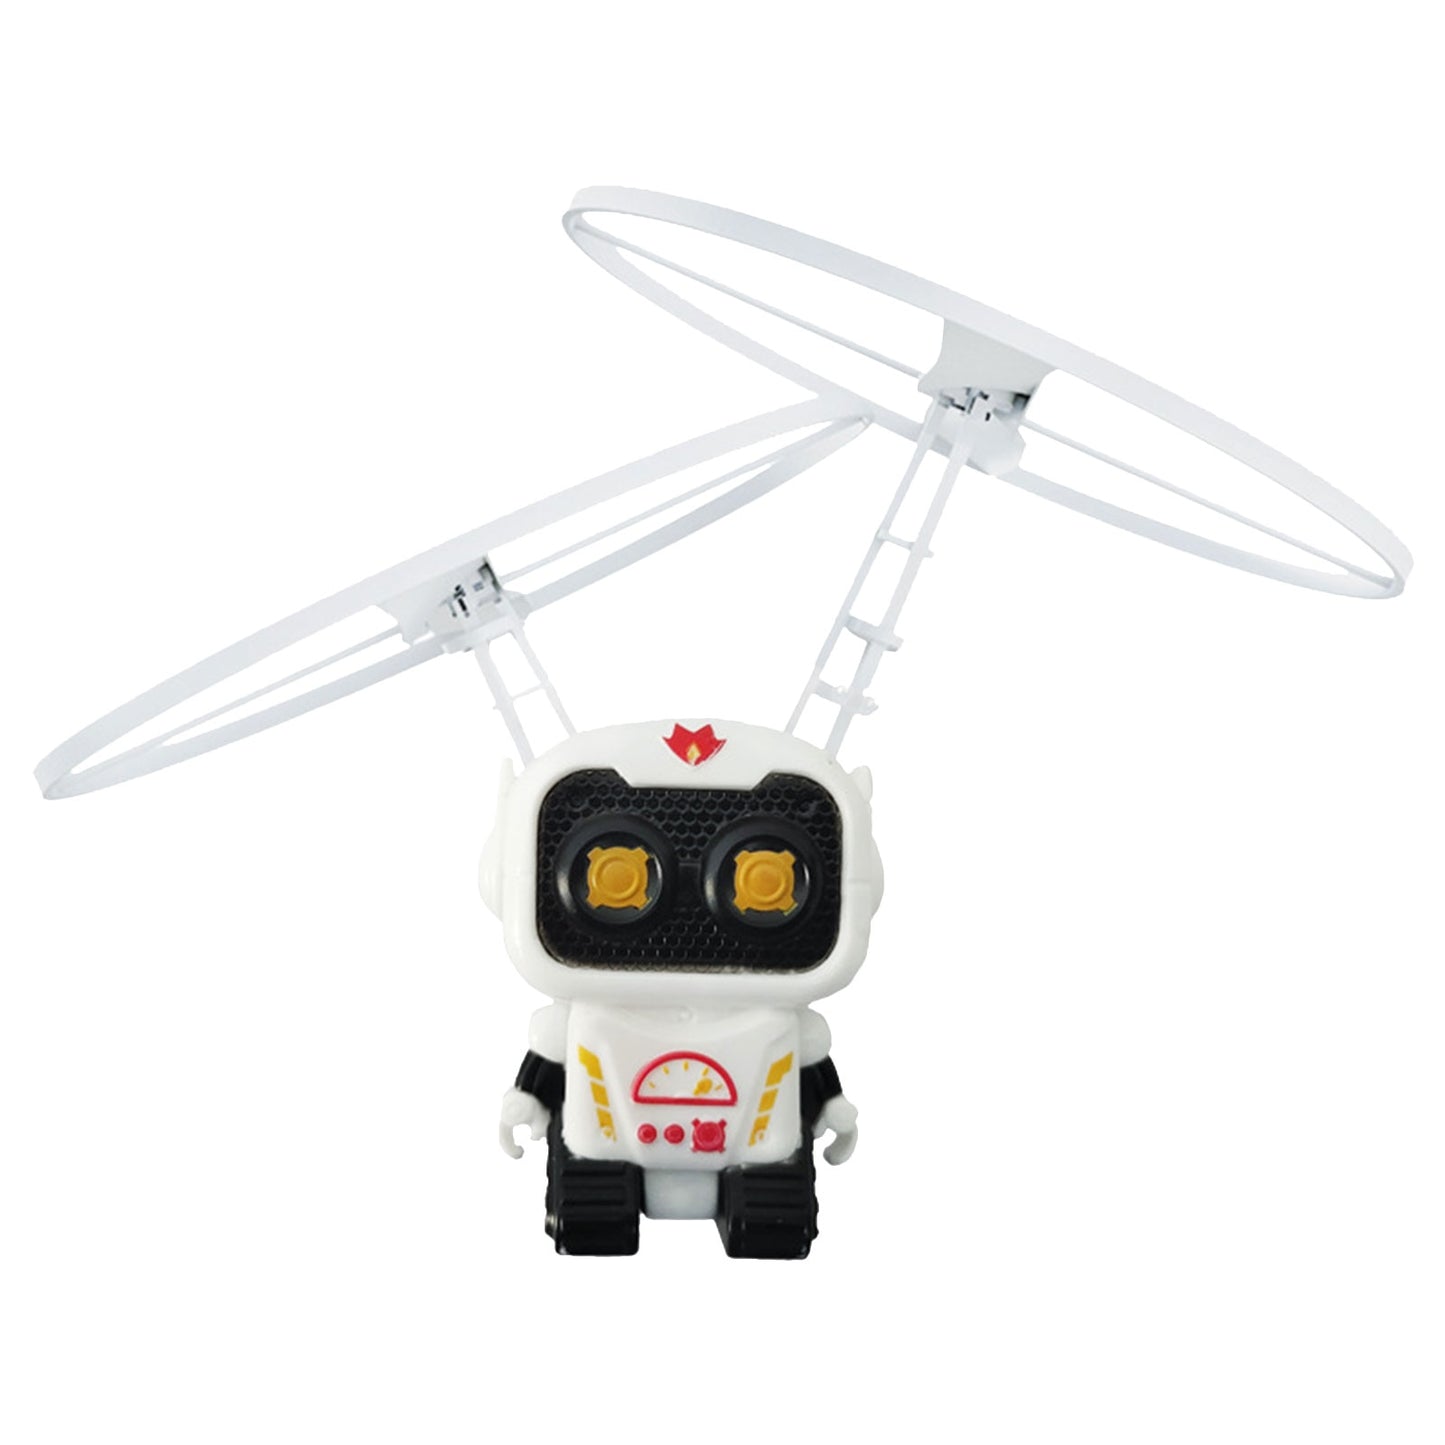 Aircraft High-Tech Hand-Controlled Drone Interactive Toy